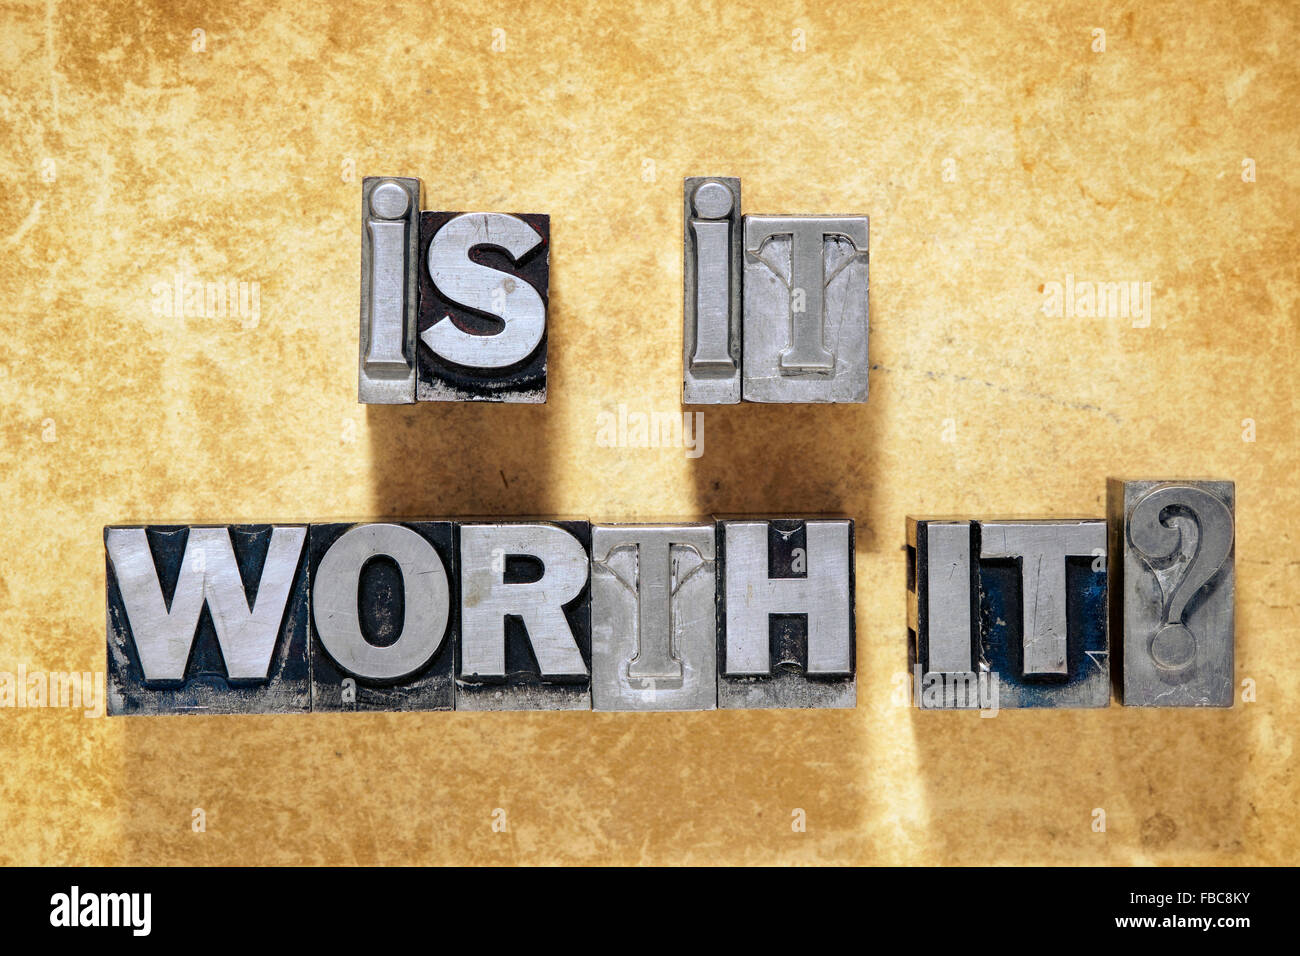 is it worth it question phrase made from metallic letterpress type on grunge cardboard background Stock Photo